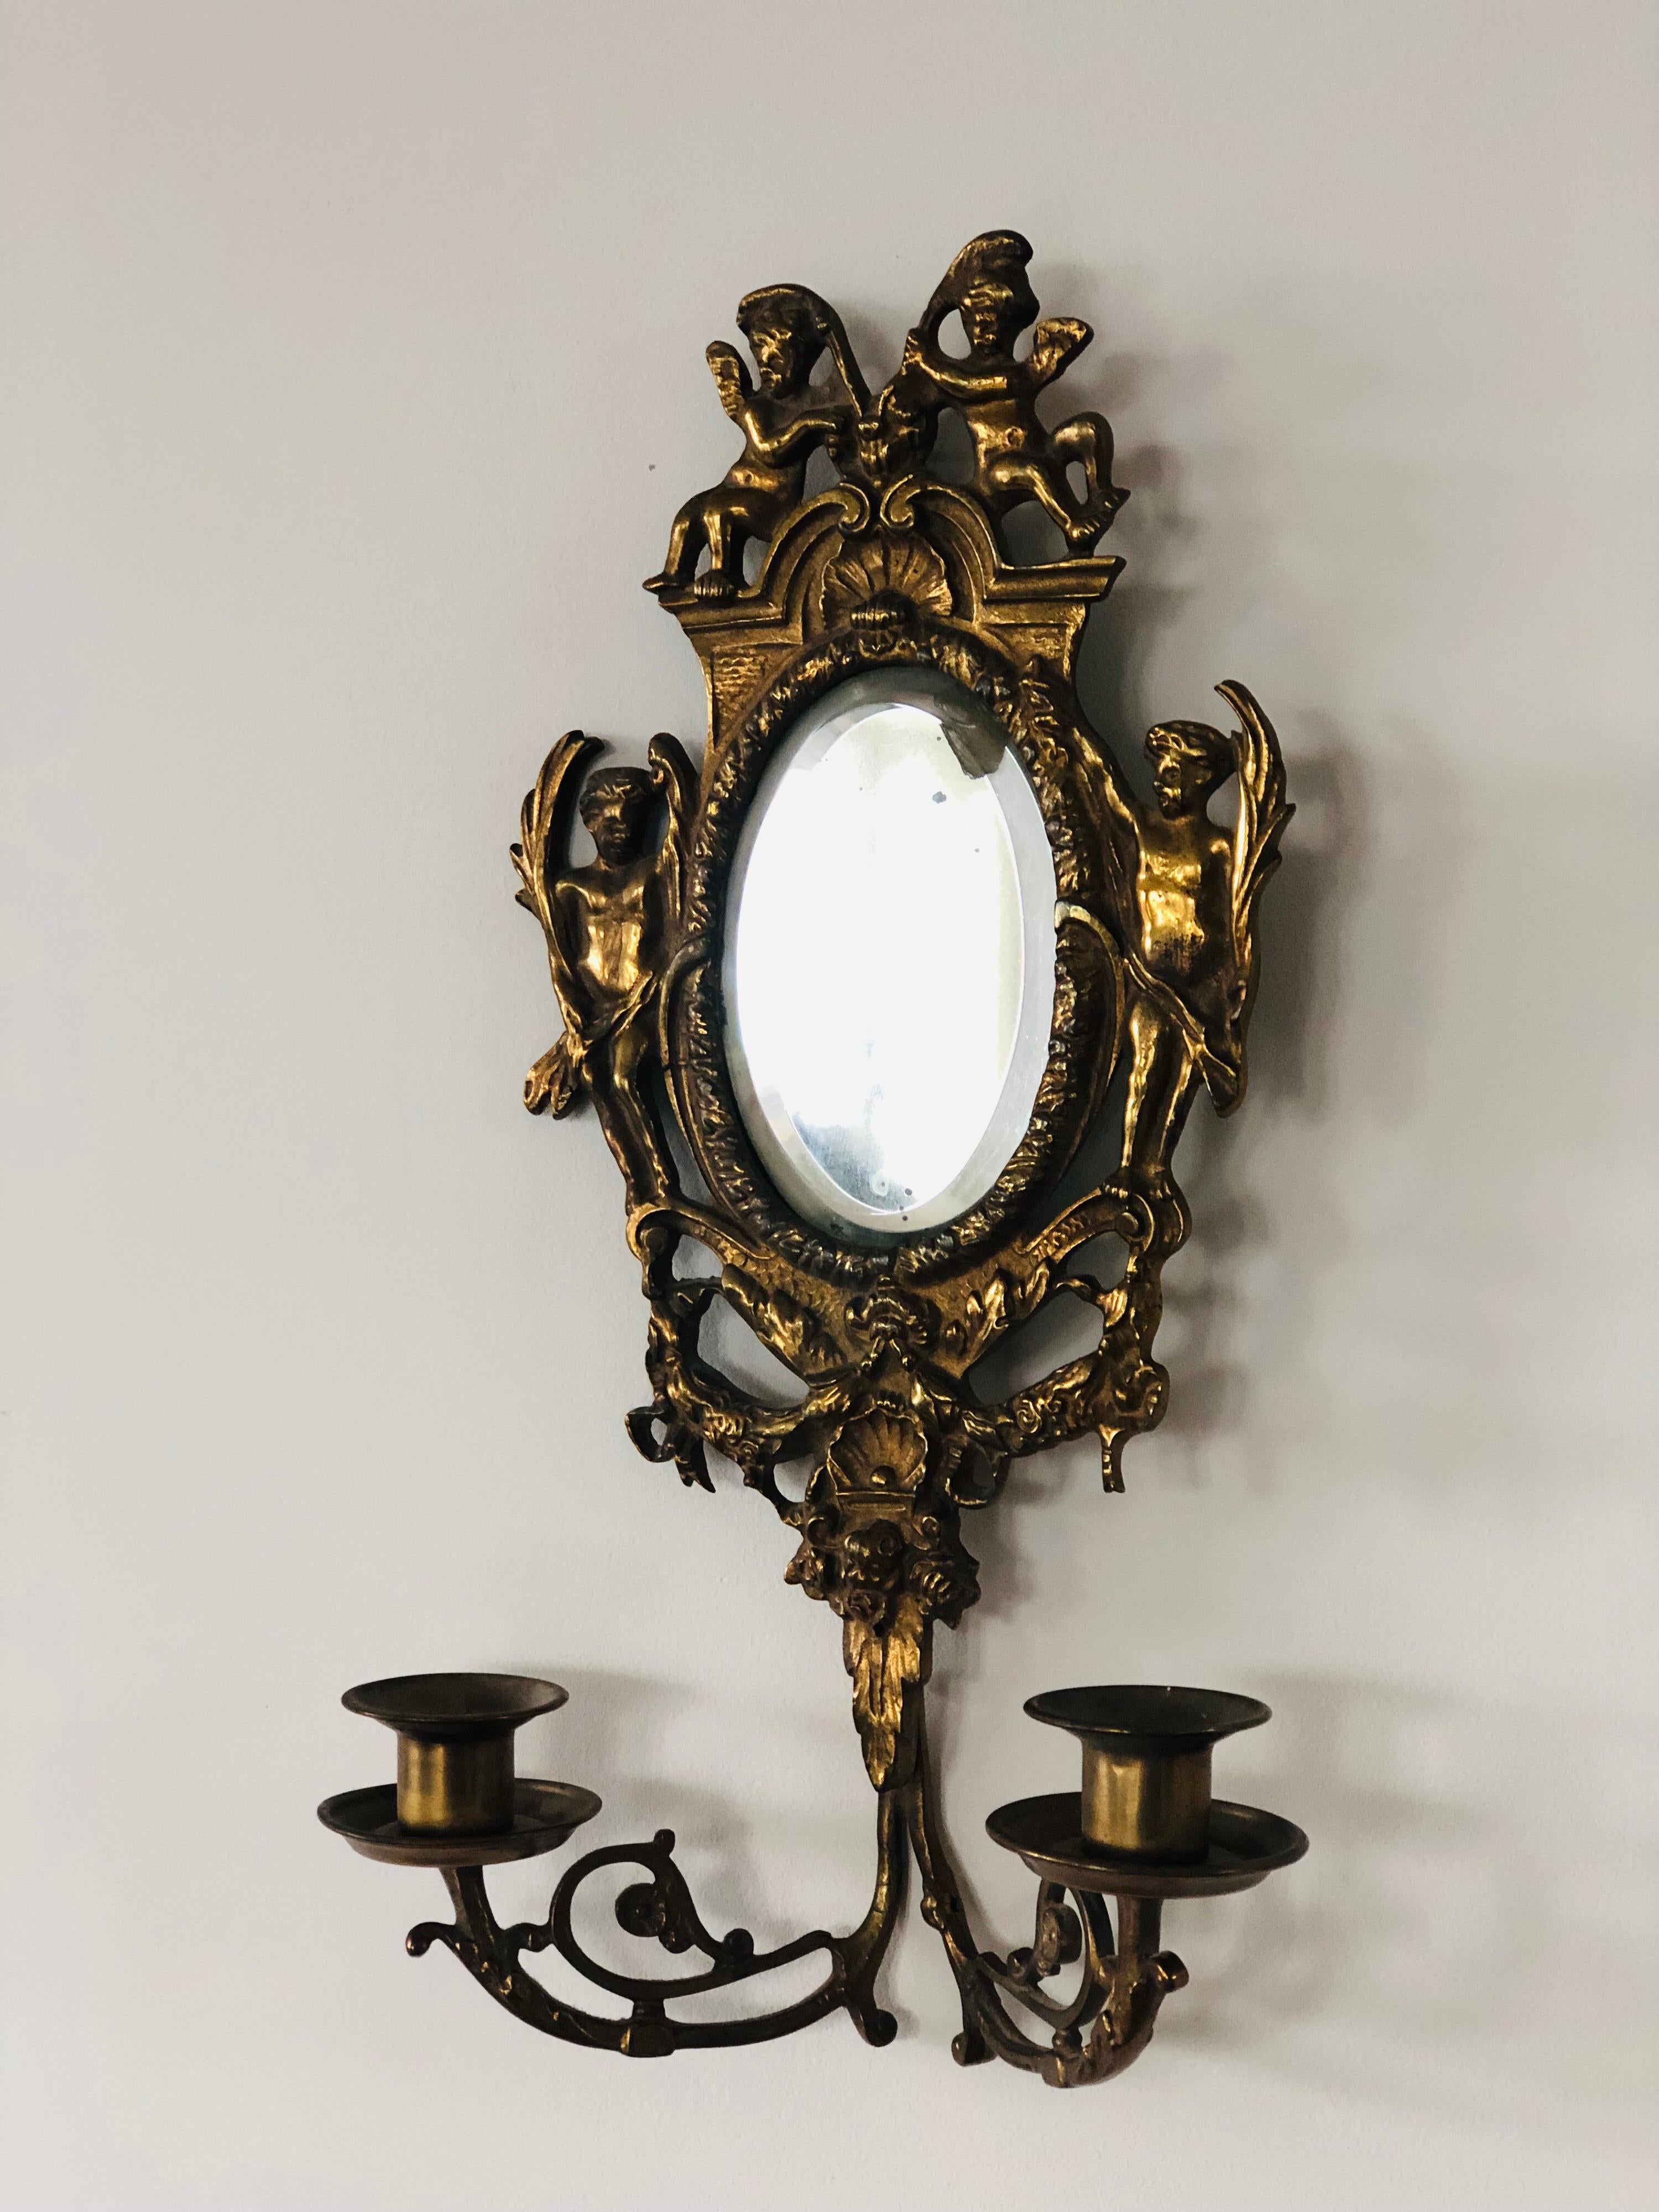 19th century pair of gold-leaf mirrored two-light sconces, with original mirror glass. 
Sconces can be wired.
France, circa 1880.